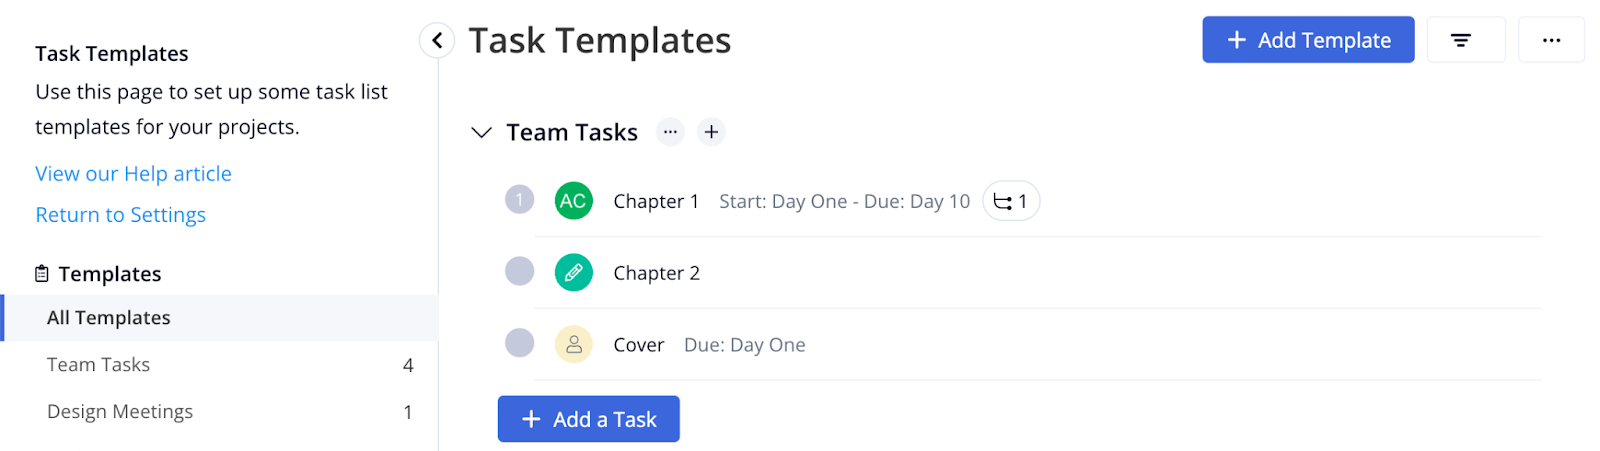 Task templates feature